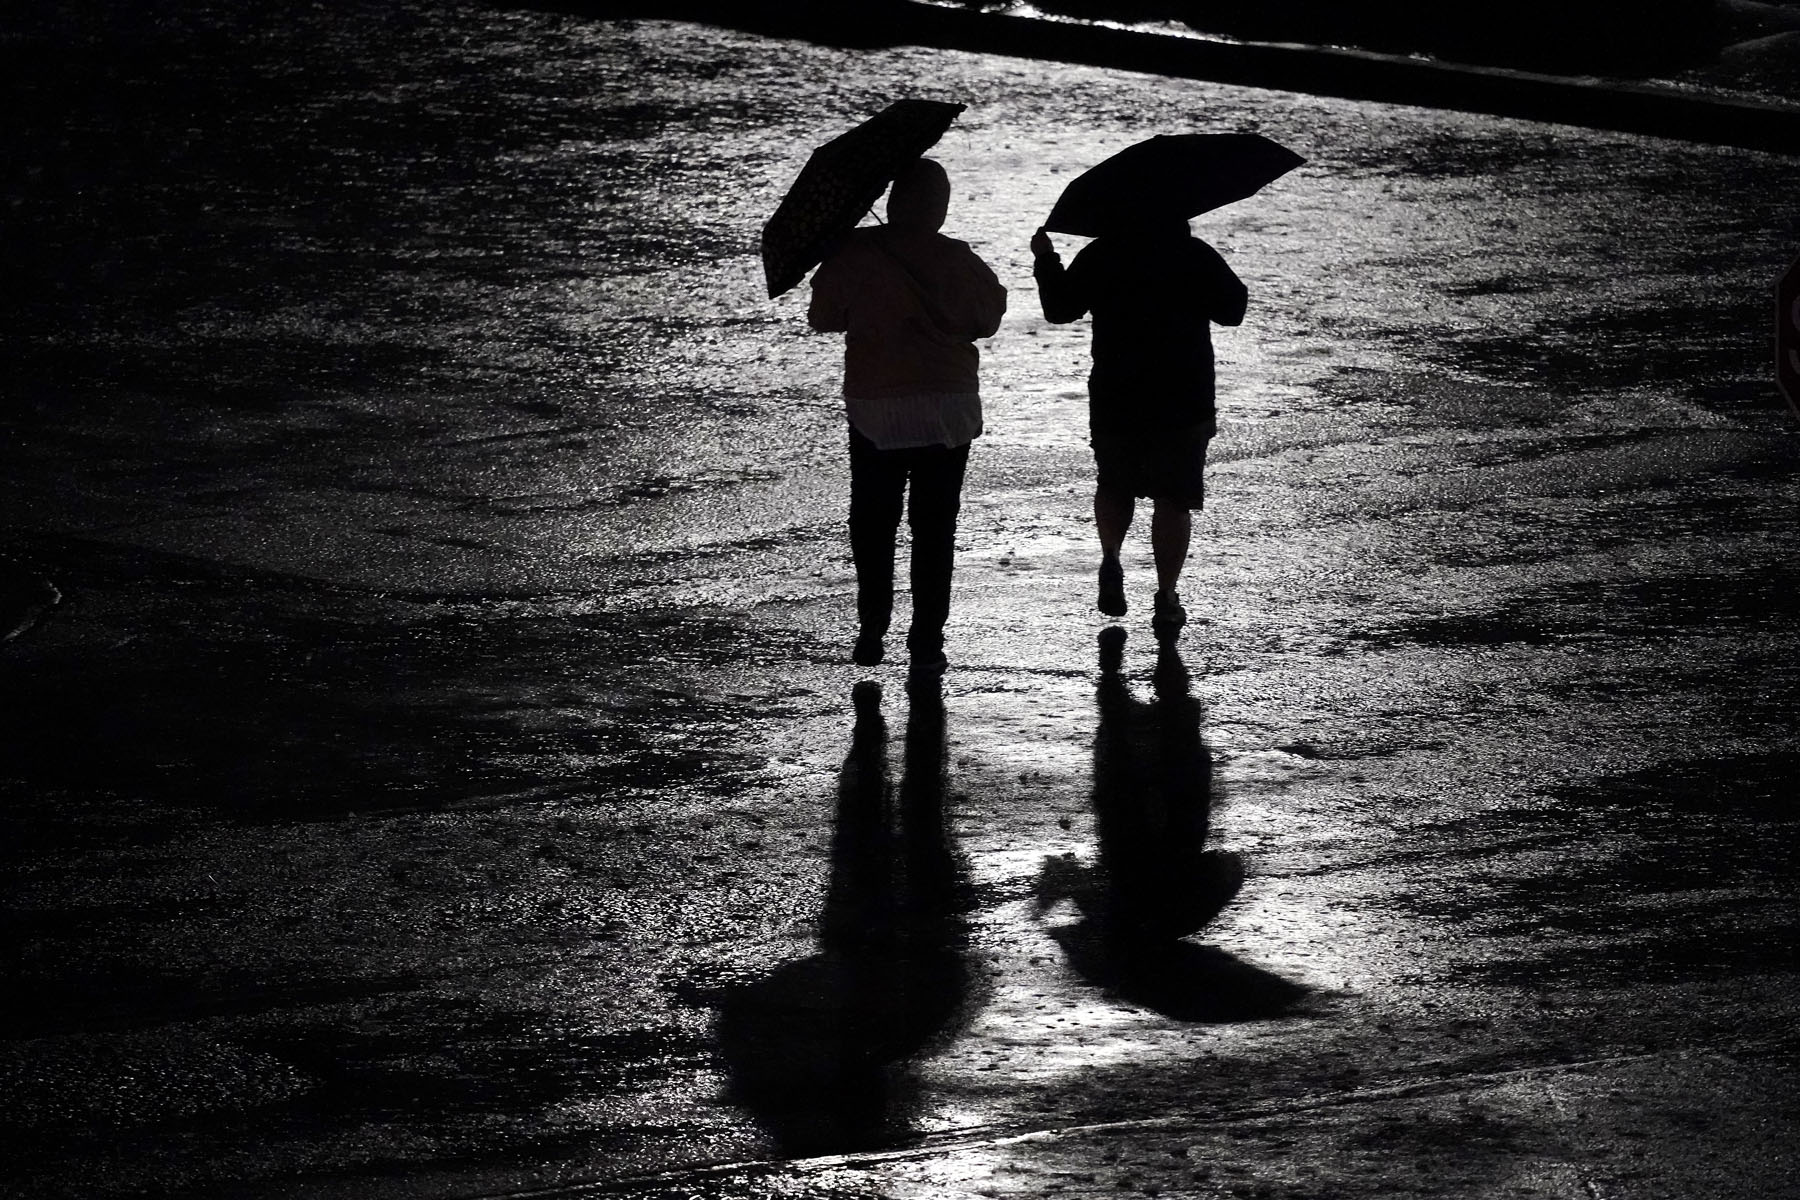 People walk across a rain-soaked parking lot after a baseball game between the Kansas City Royals and the New York Yankees Friday, April 29, 2022, in Kansas City, Mo. The game was called after eight innings due to weather. (AP Photo/Charlie Riedel)